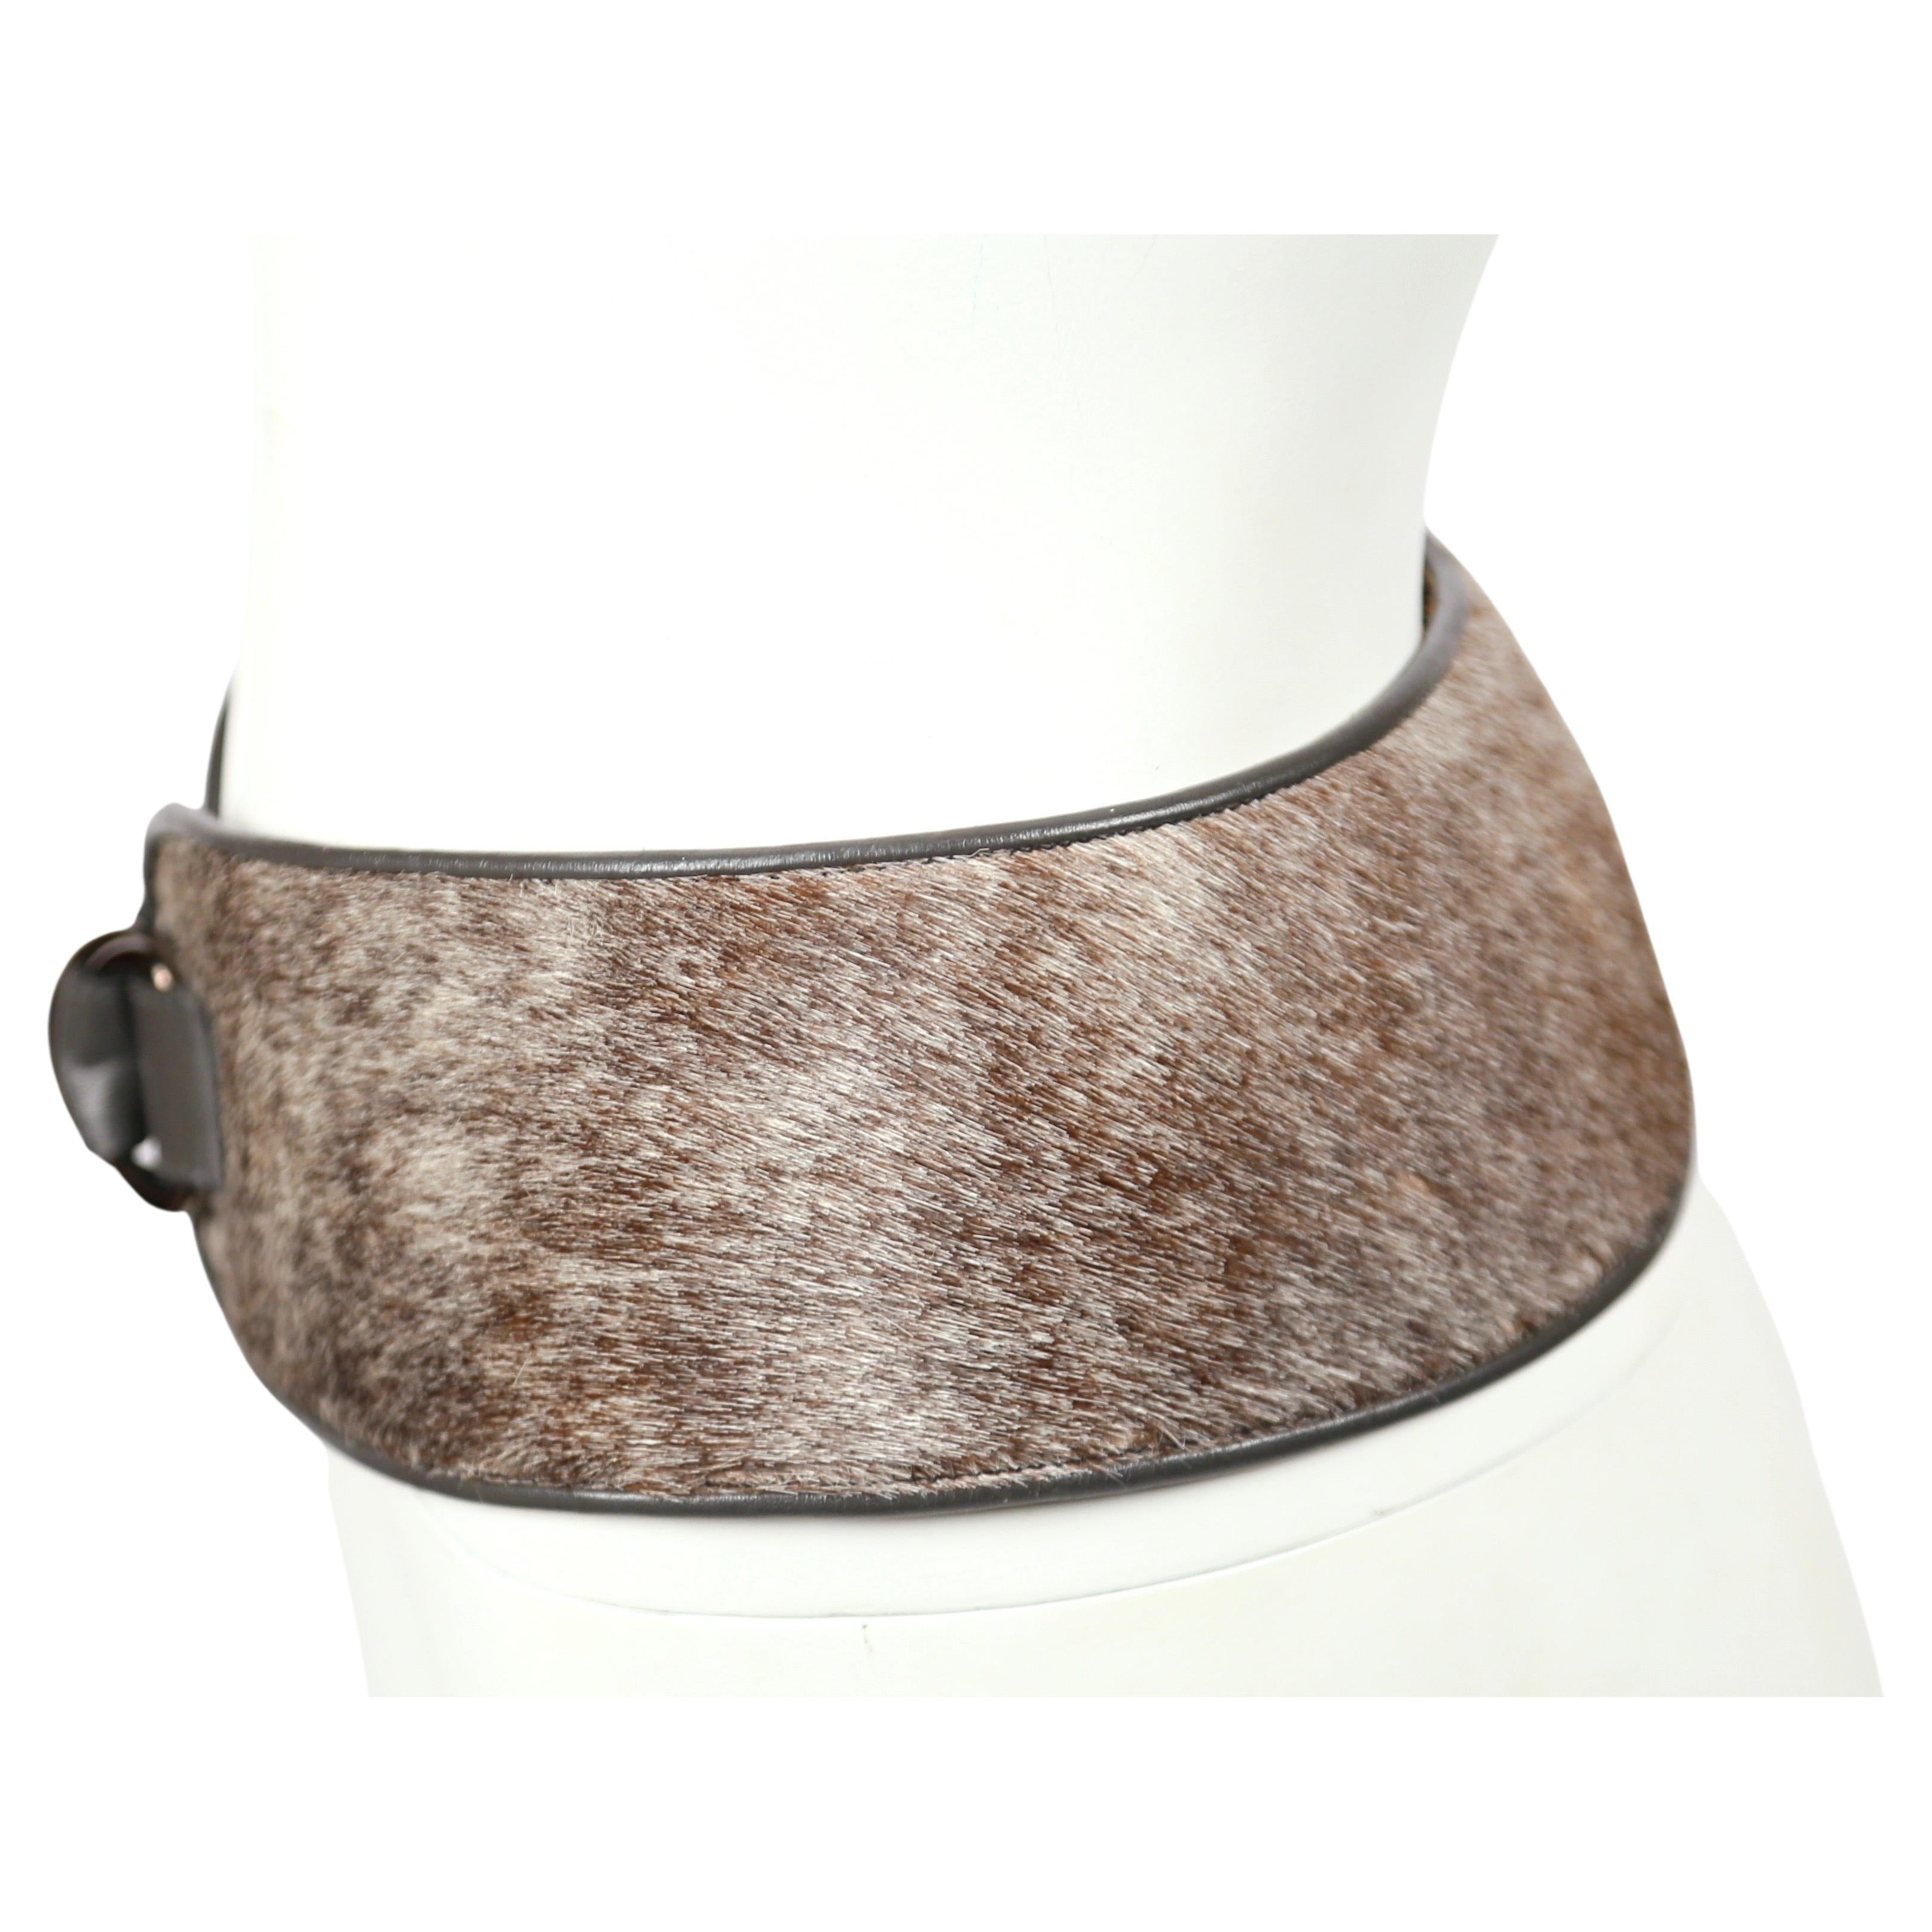 Grey, pony fur belt with grey leather trim from Yves Saint Laurent dating to fall of 1986 as seen on the runway. Labeled a size Medium. Fits a size 4 to 6 (27